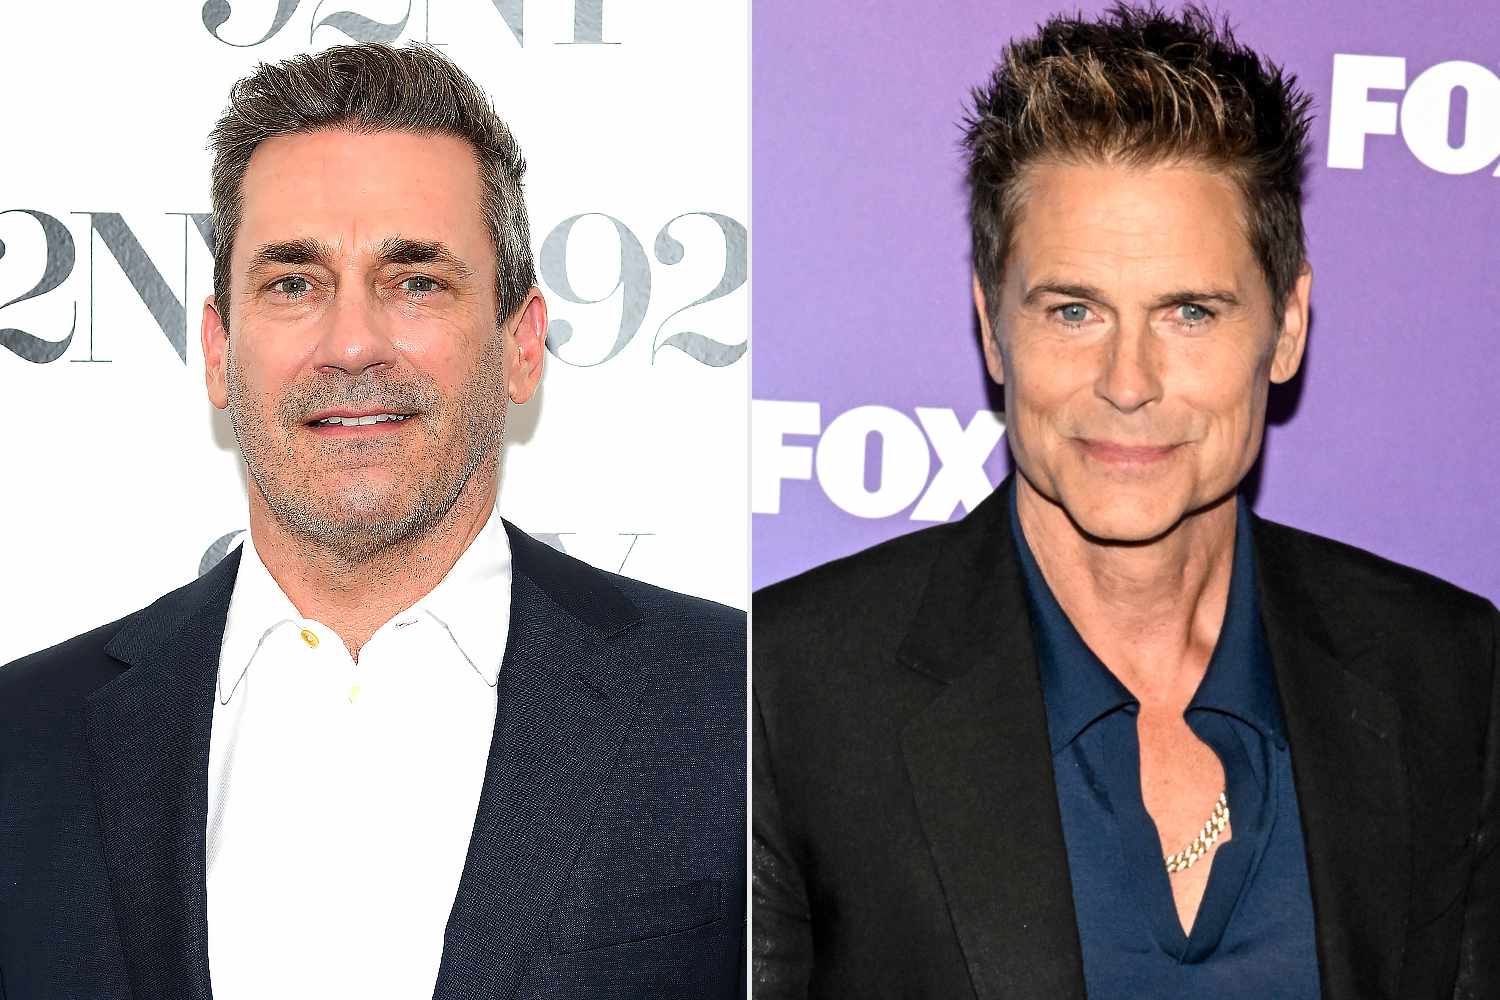 Jon Hamm attends a discussion of the series "Fargo" at 92NY on June 15, 2024 in New York City; Rob Lowe at the Fox 2024 Upfront Red Carpet held at the Ritz-Carlton Nomad on May 13, 2024 in New York City. 